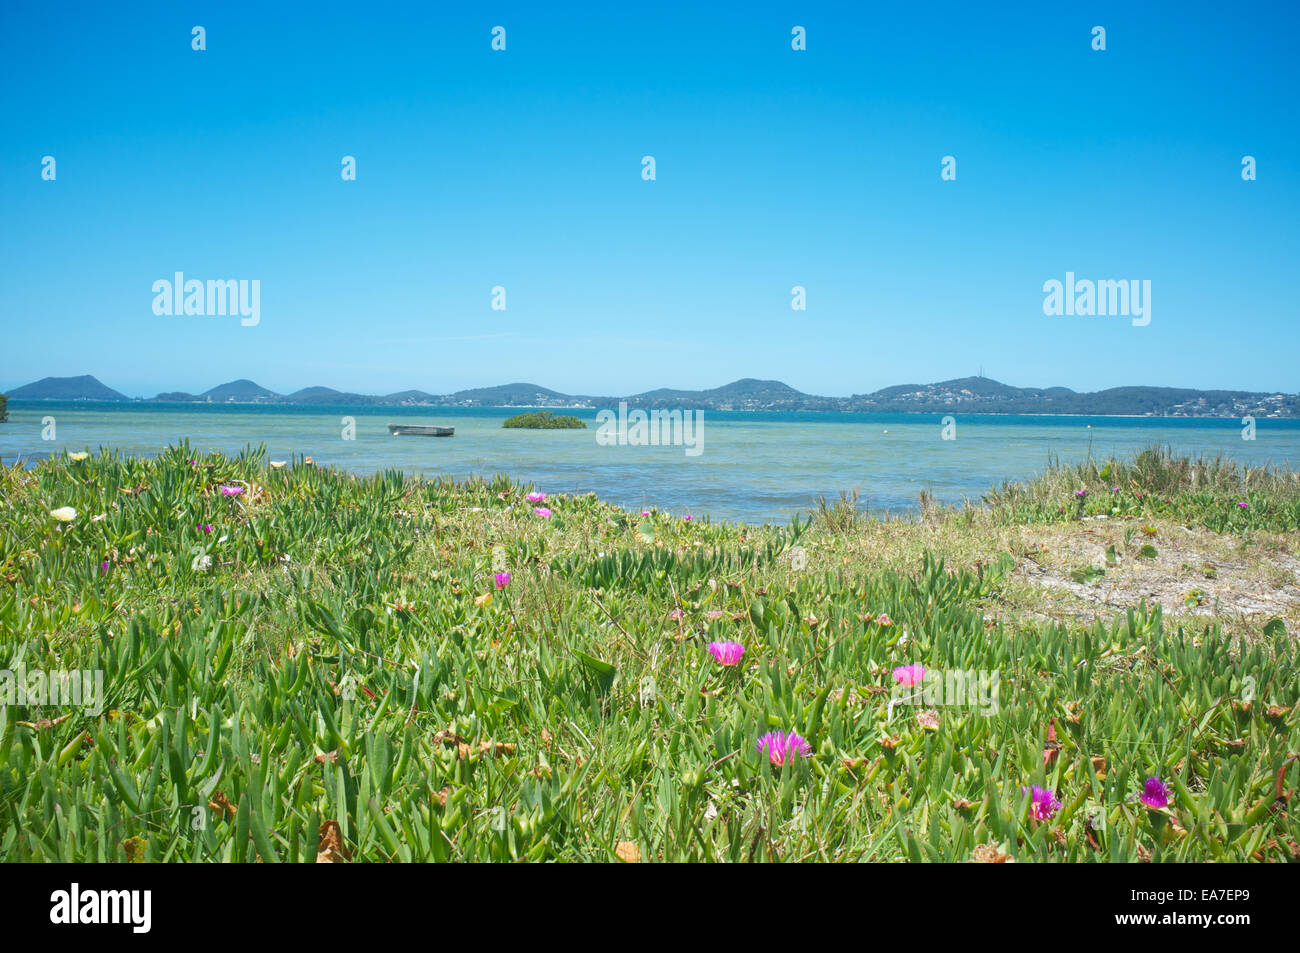 Spring time at Port Stephens, New South Wales, Australia Stock Photo